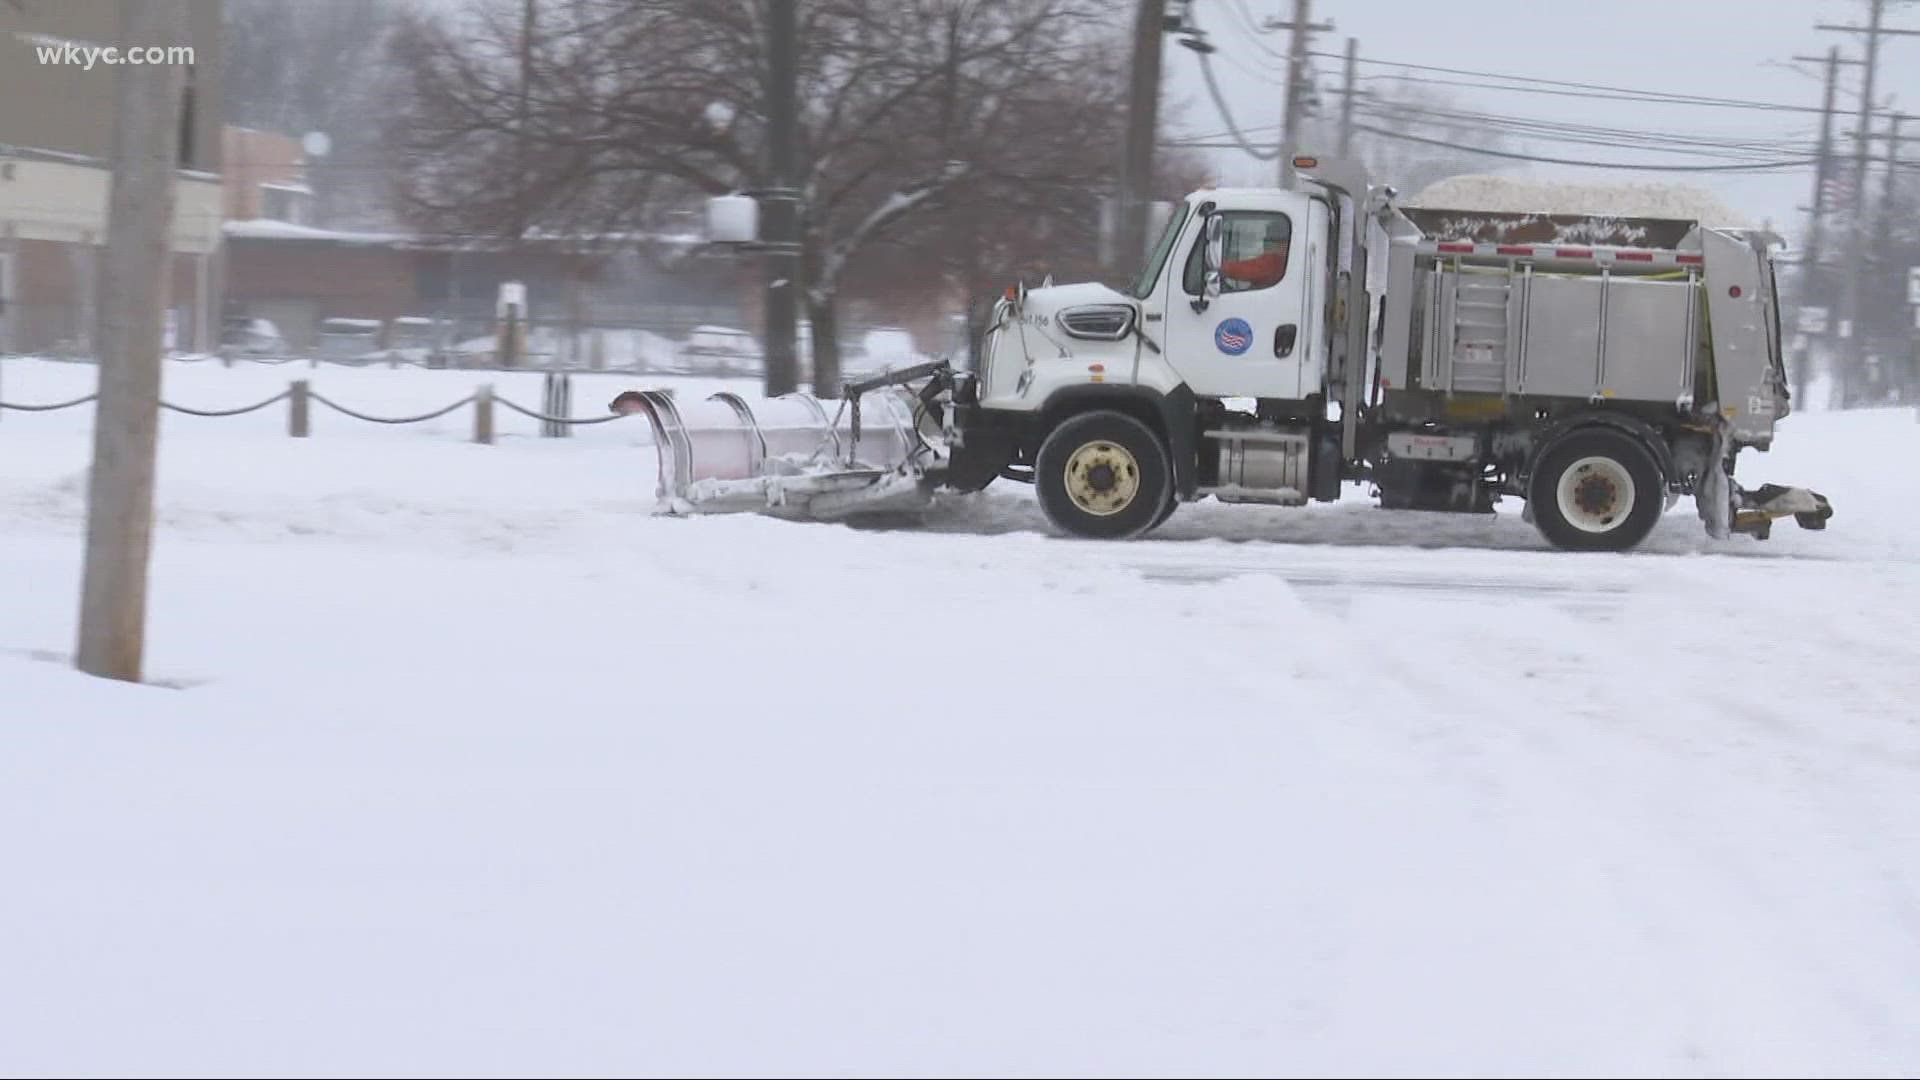 The city of Cleveland has faced criticism for not being better prepared to handle the task of snow removal. Bibb pledges to overhaul the city's current plan.